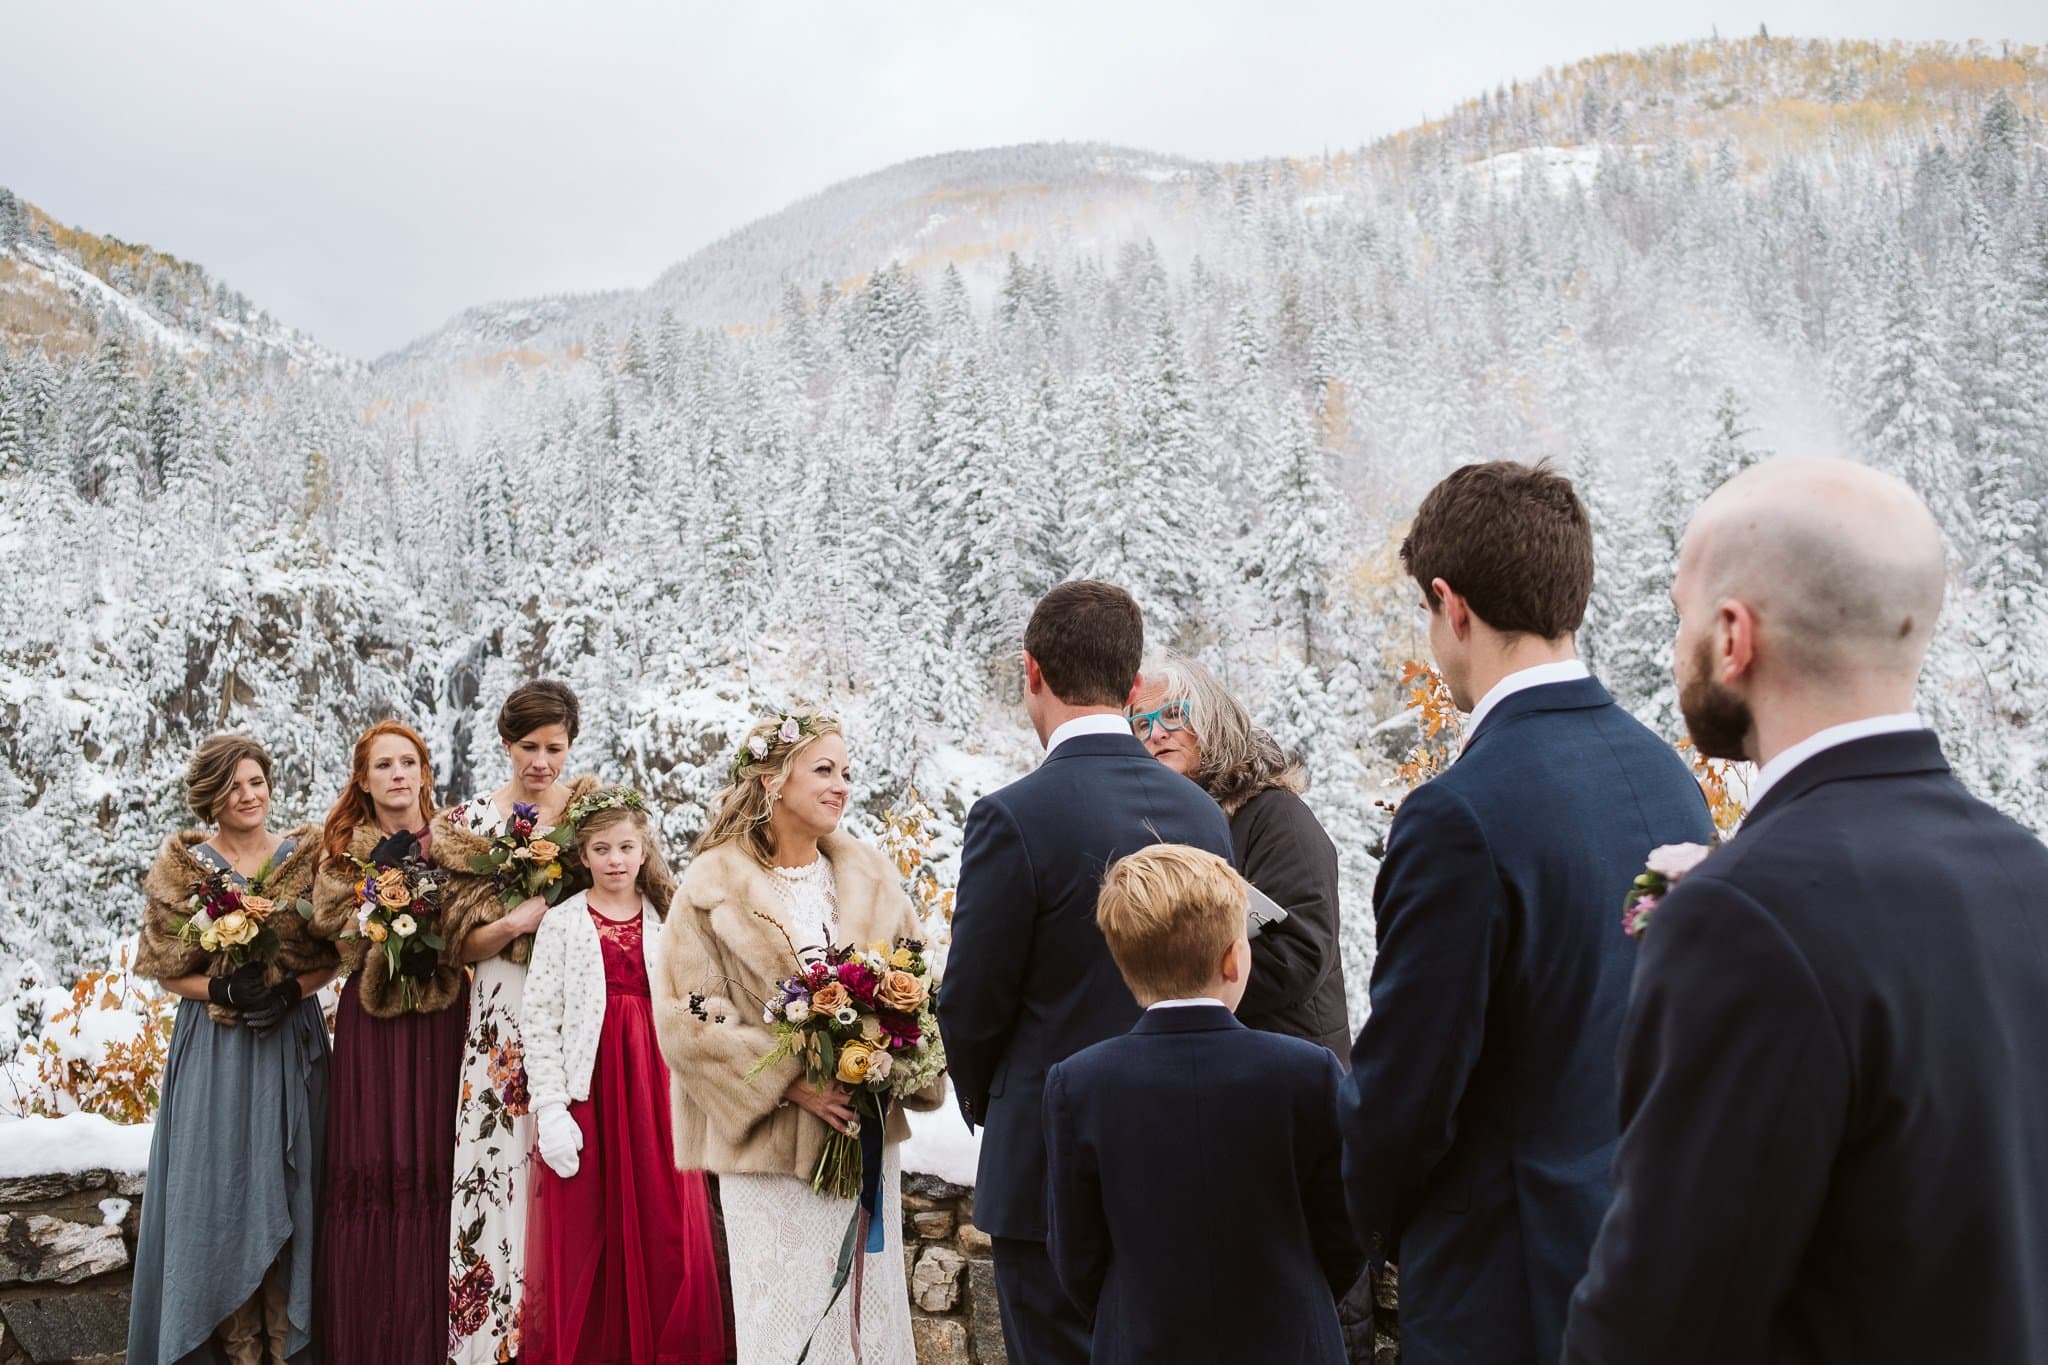 Elopement ceremony at Fish Creek Falls overlook in Steamboat Springs